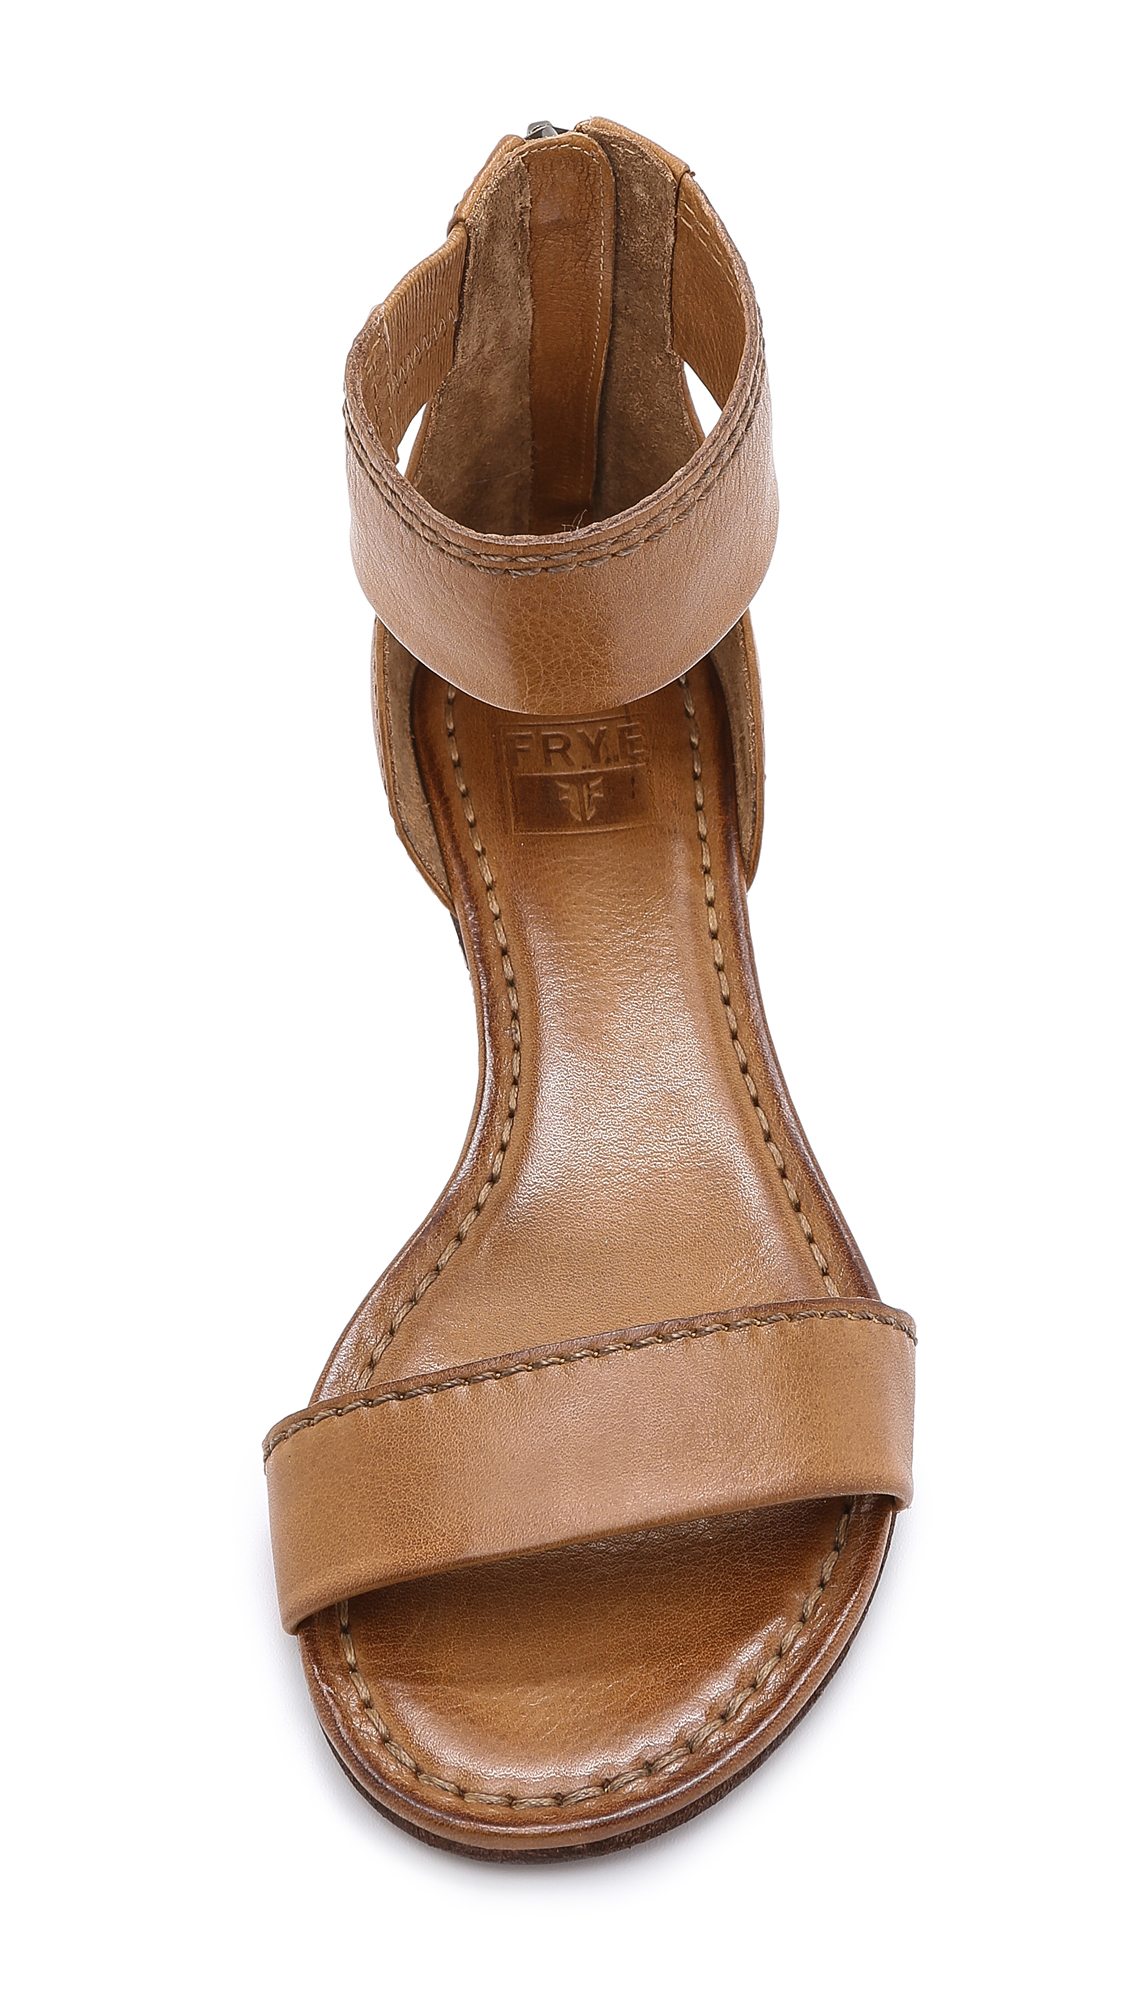 Lyst - Frye Carson Ankle Zip Flat Sandals - Camel in Natural1128 x 2000